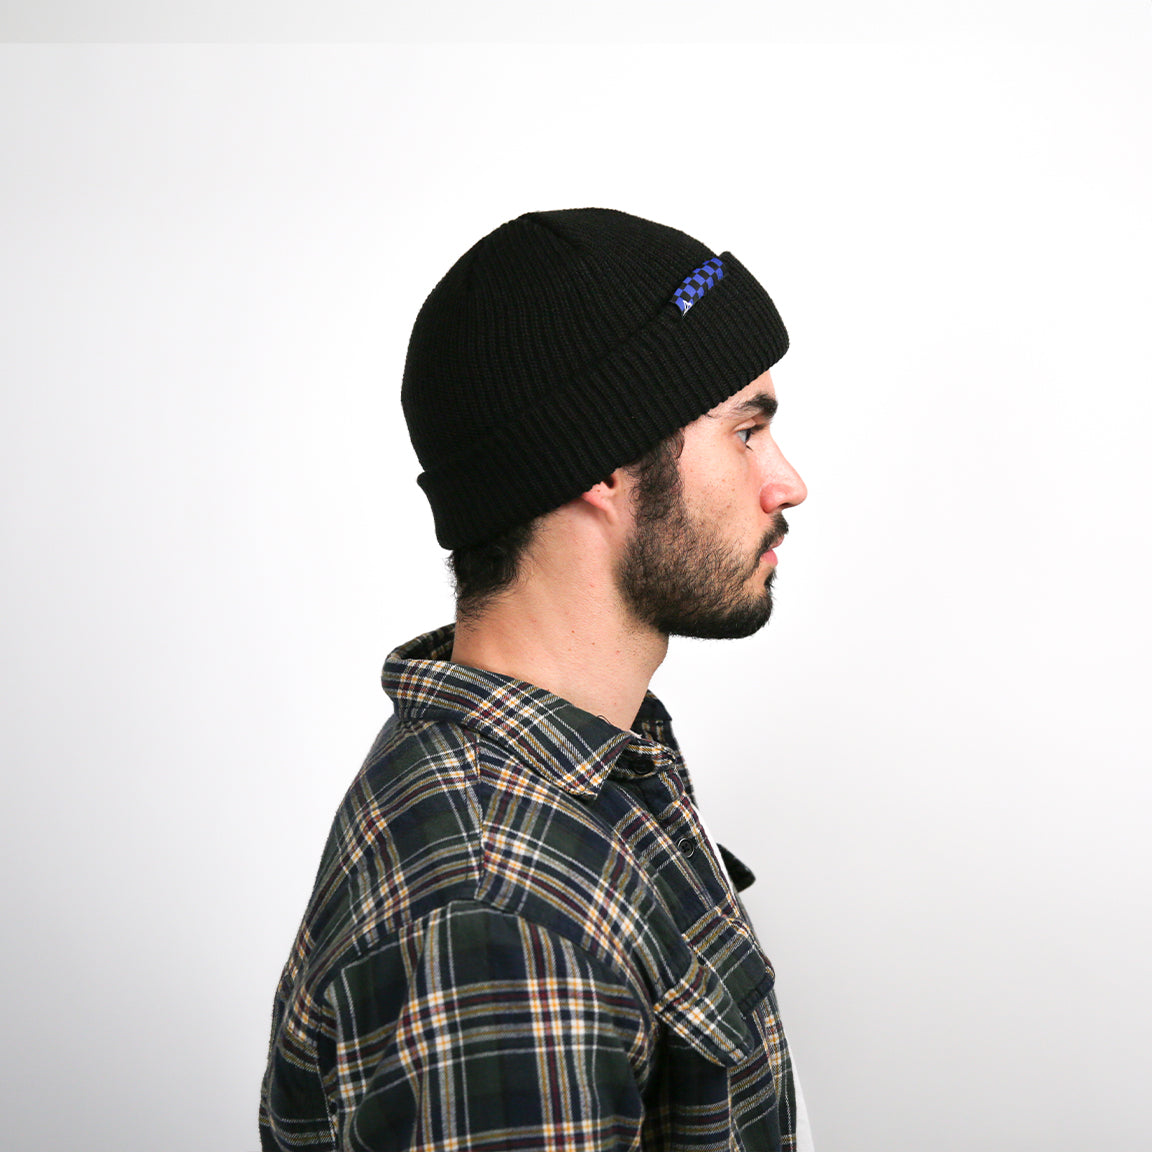 Here, the beanie is shown from the side with a navy and black checkered logo patch, providing a slight variation in design while maintaining the overall look and feel.